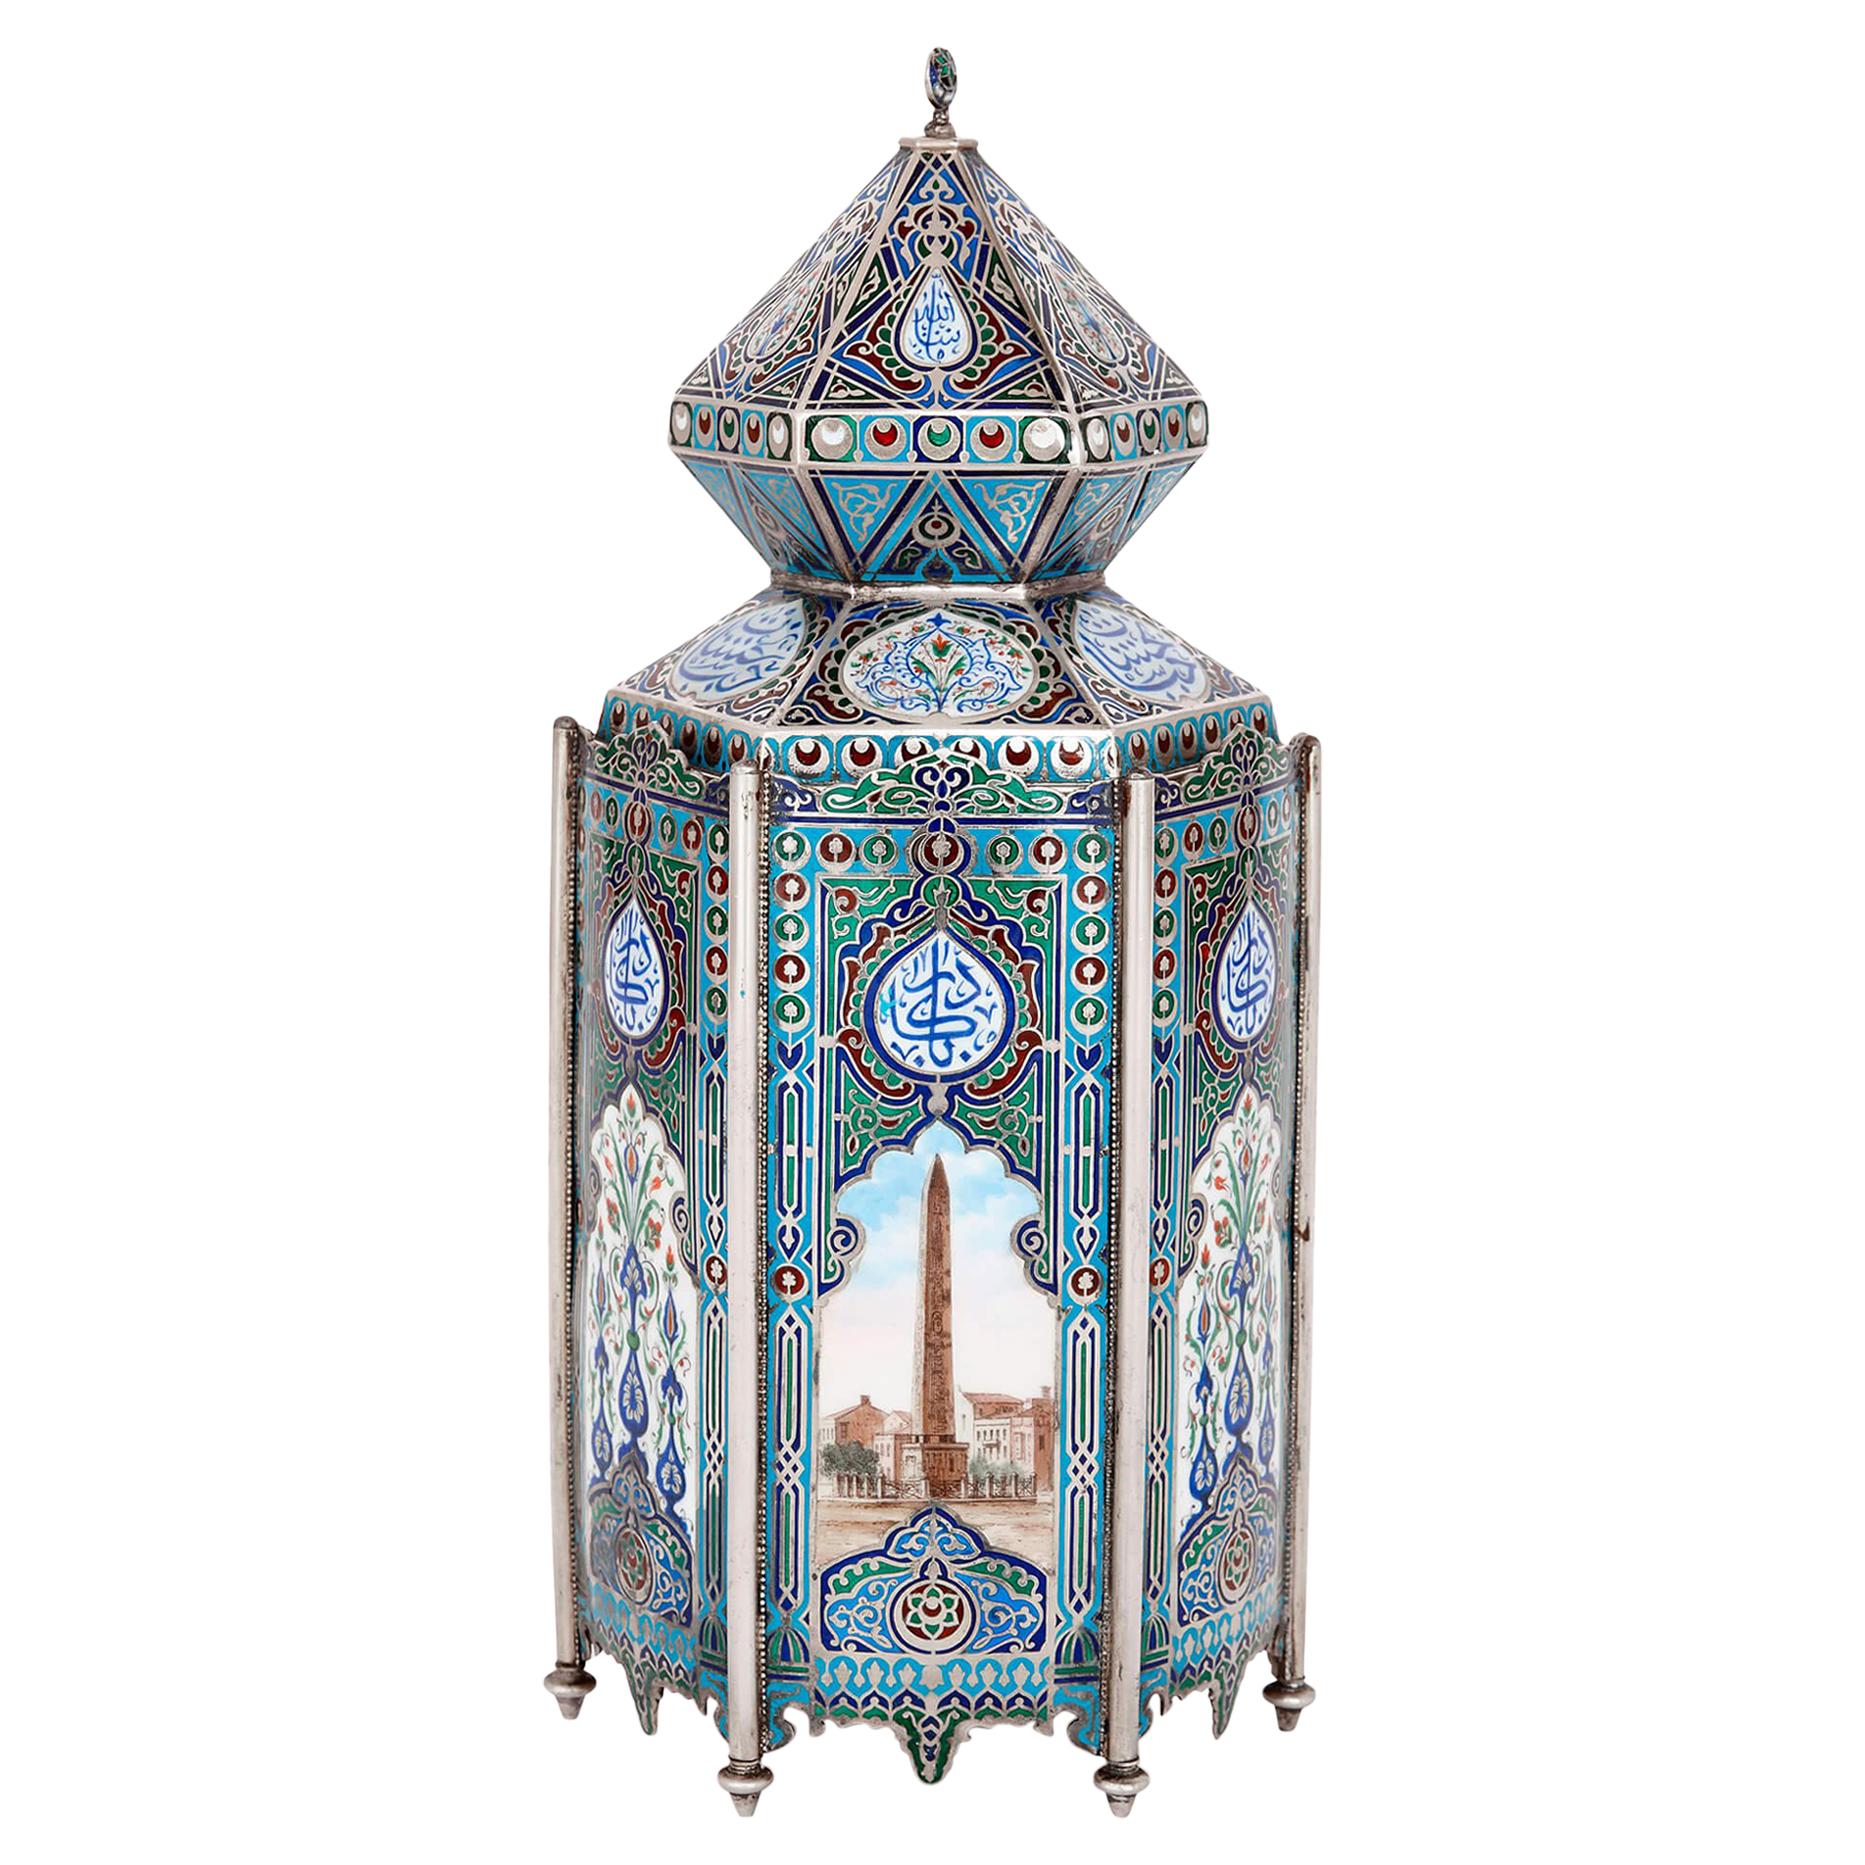 Unusual Russian-Made Silver and Enamel Islamic Vase For Sale